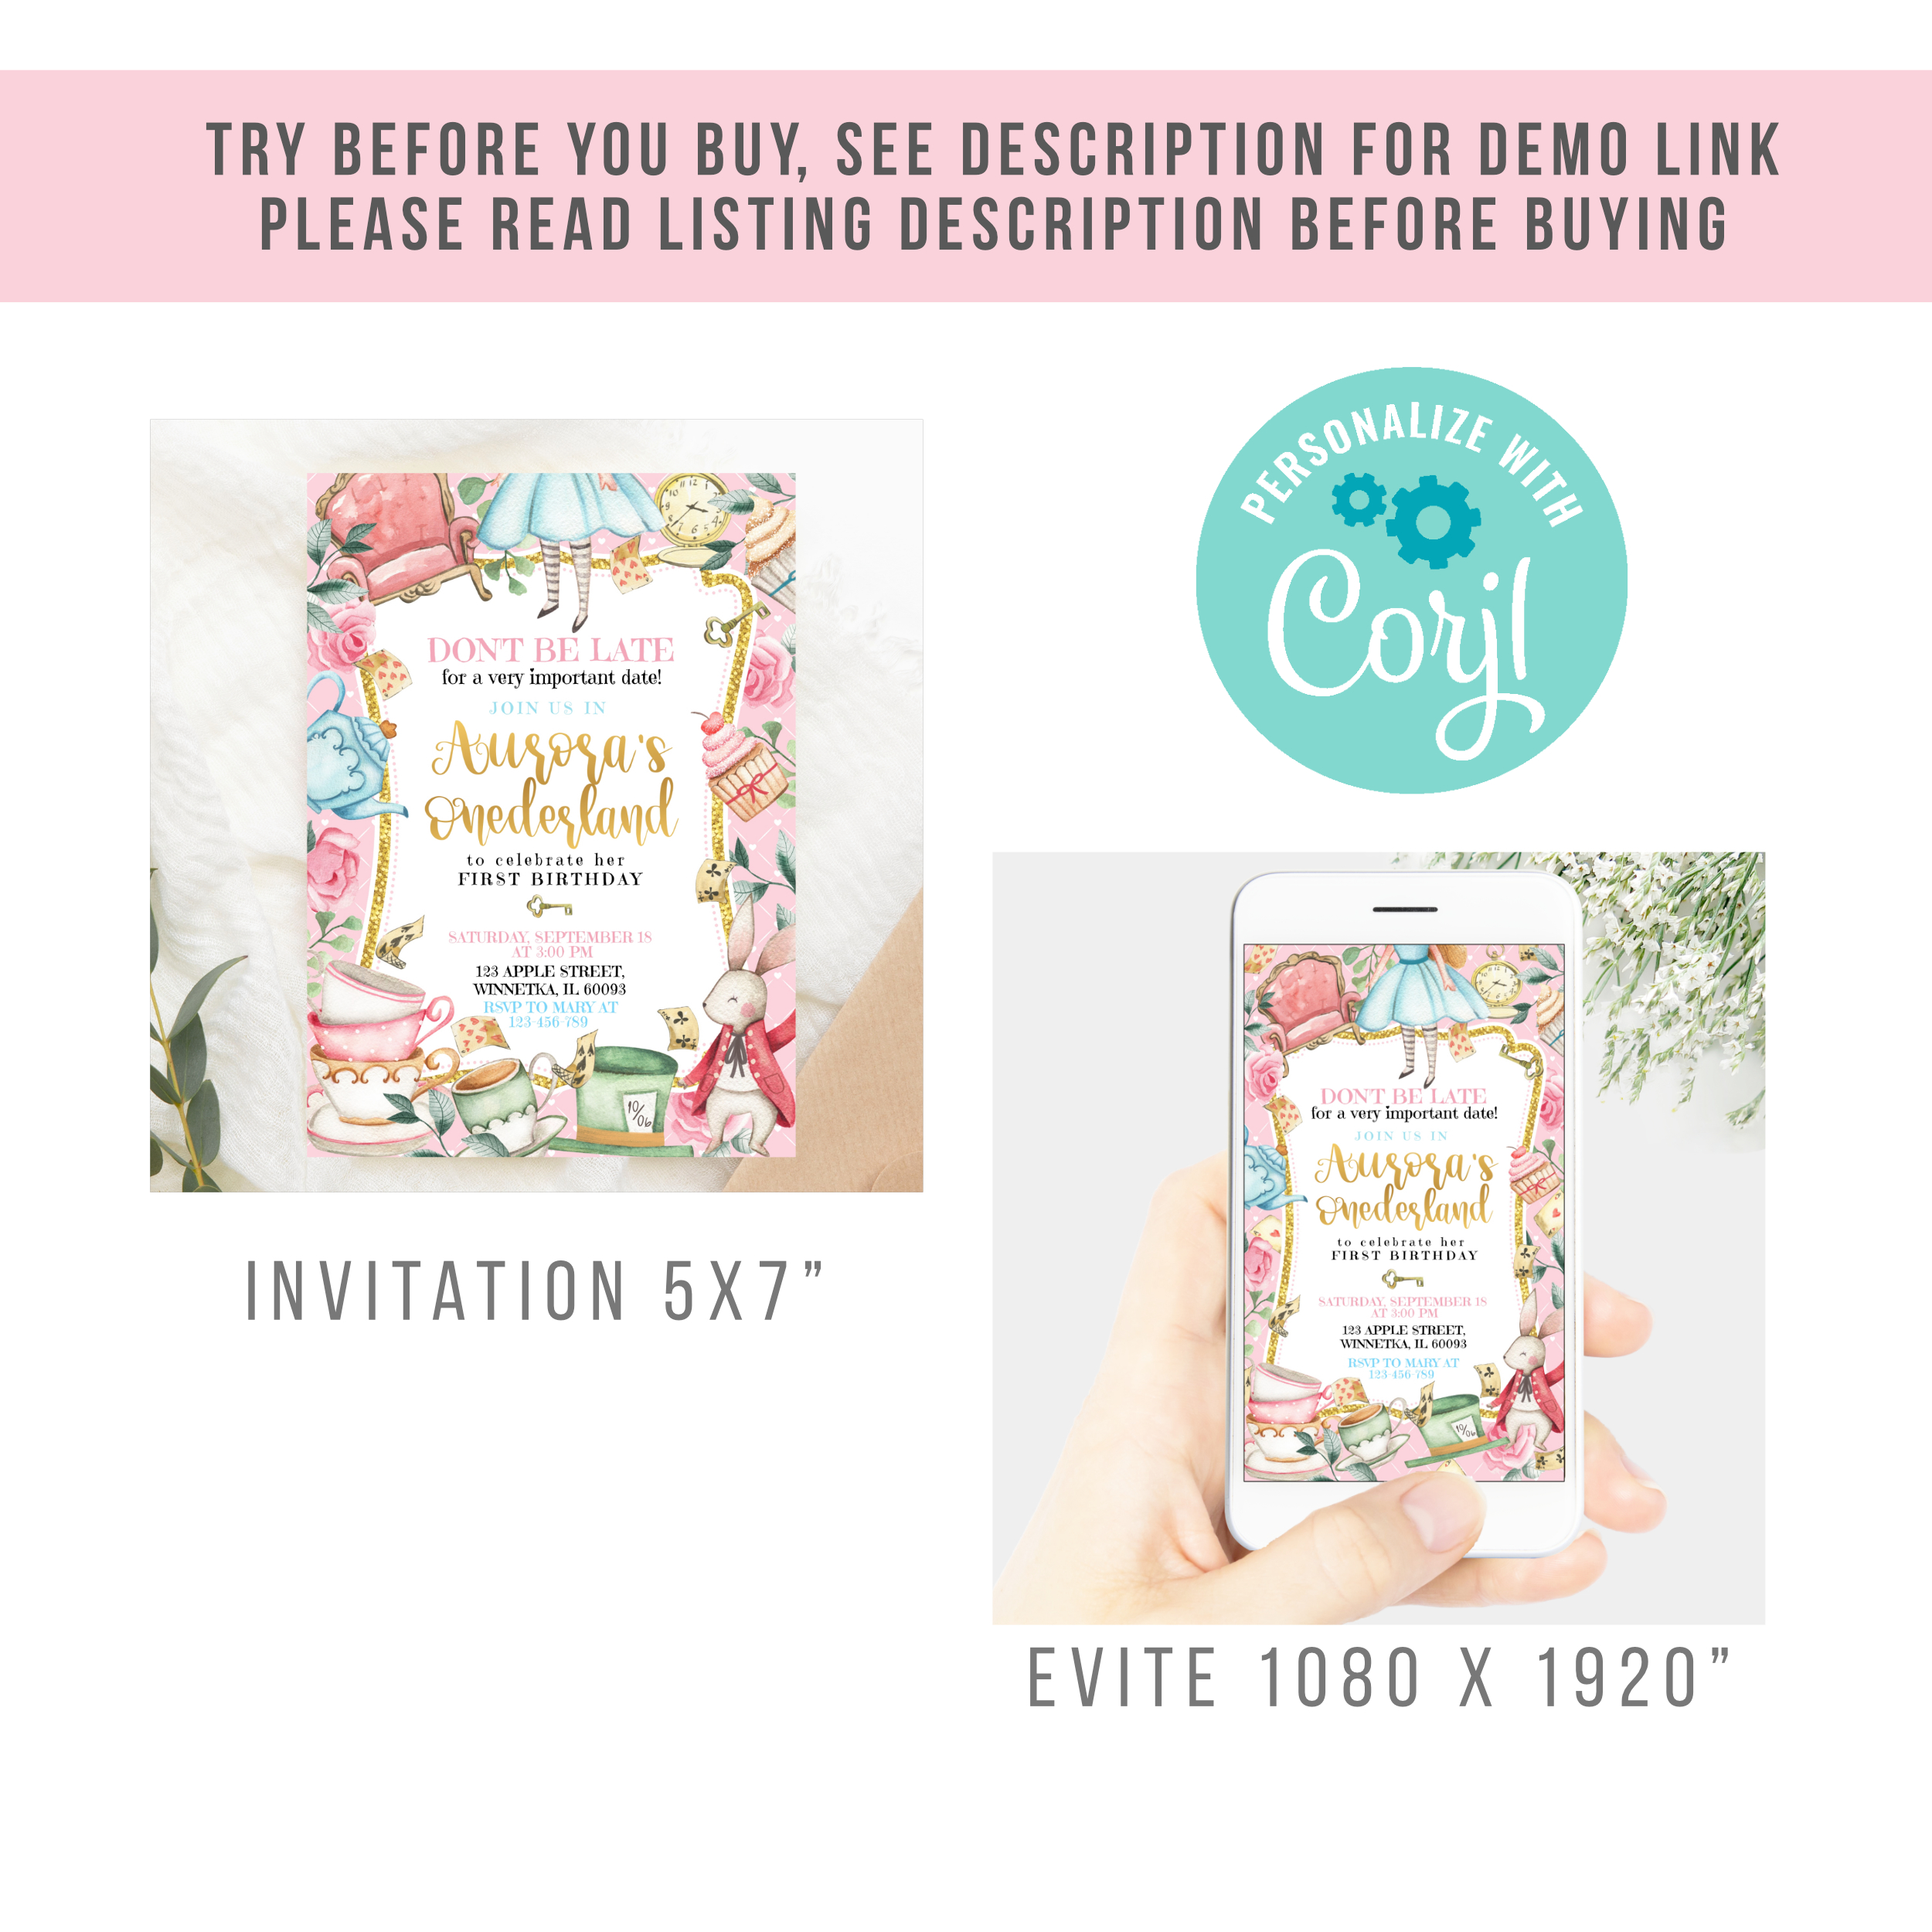 Birthday Mega Bundle Alice in Onederland Pink 1st Birthday Girl Party Invitation Bundle Pack with Editable Corjl Template – Digital Download Birthday_Wizard